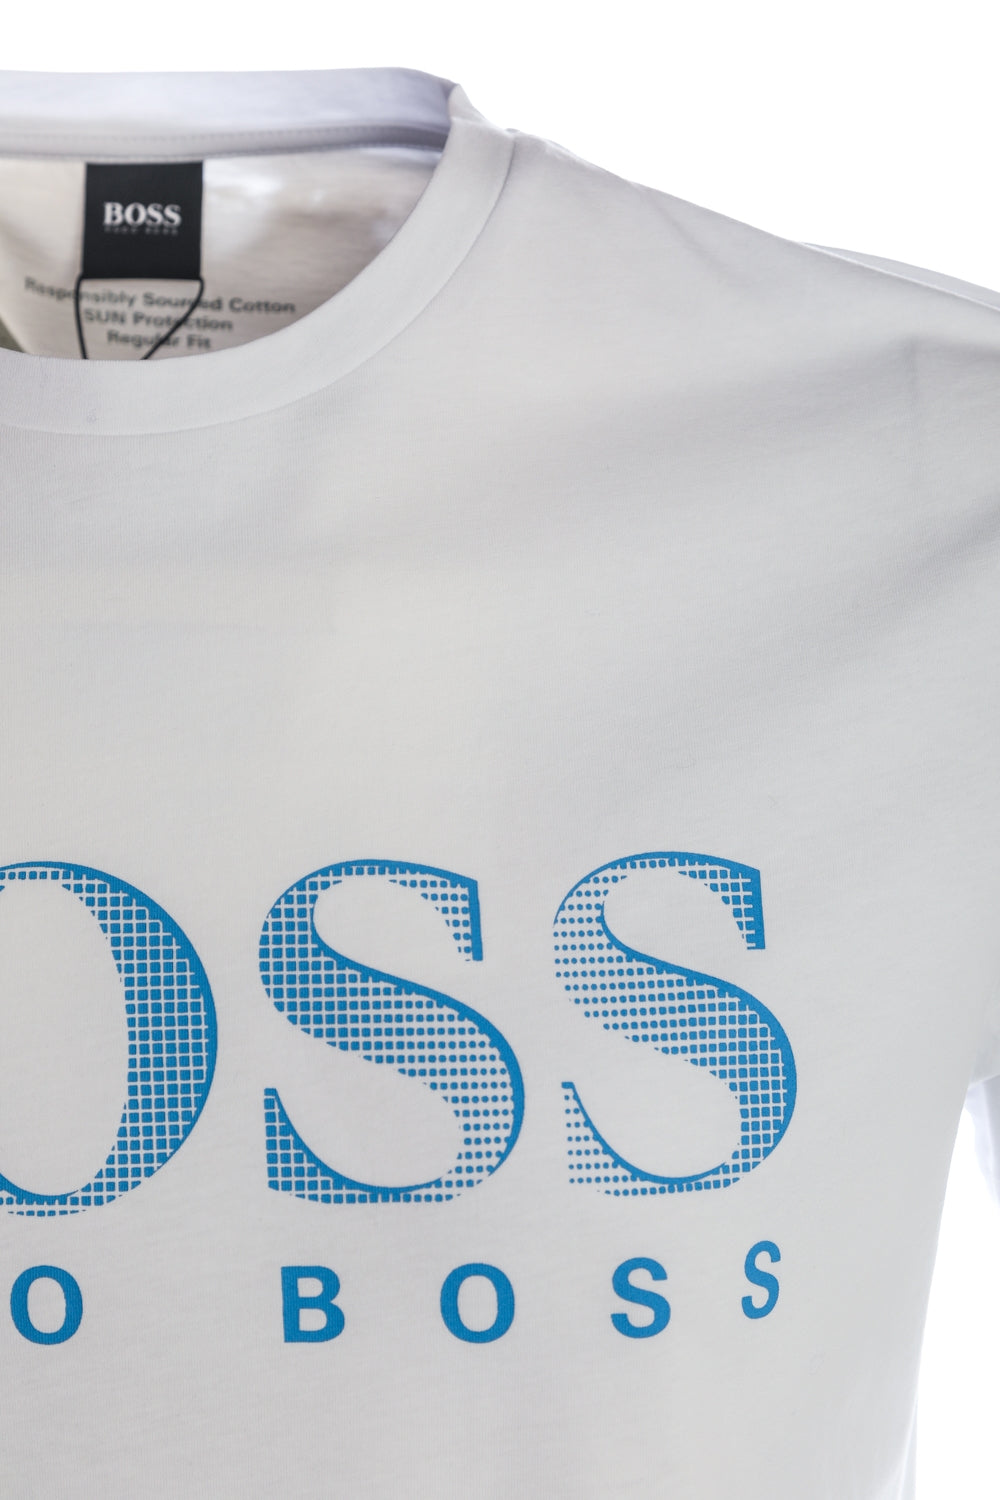 BOSS RN UV Protection T-Shirt in White & Turquoise